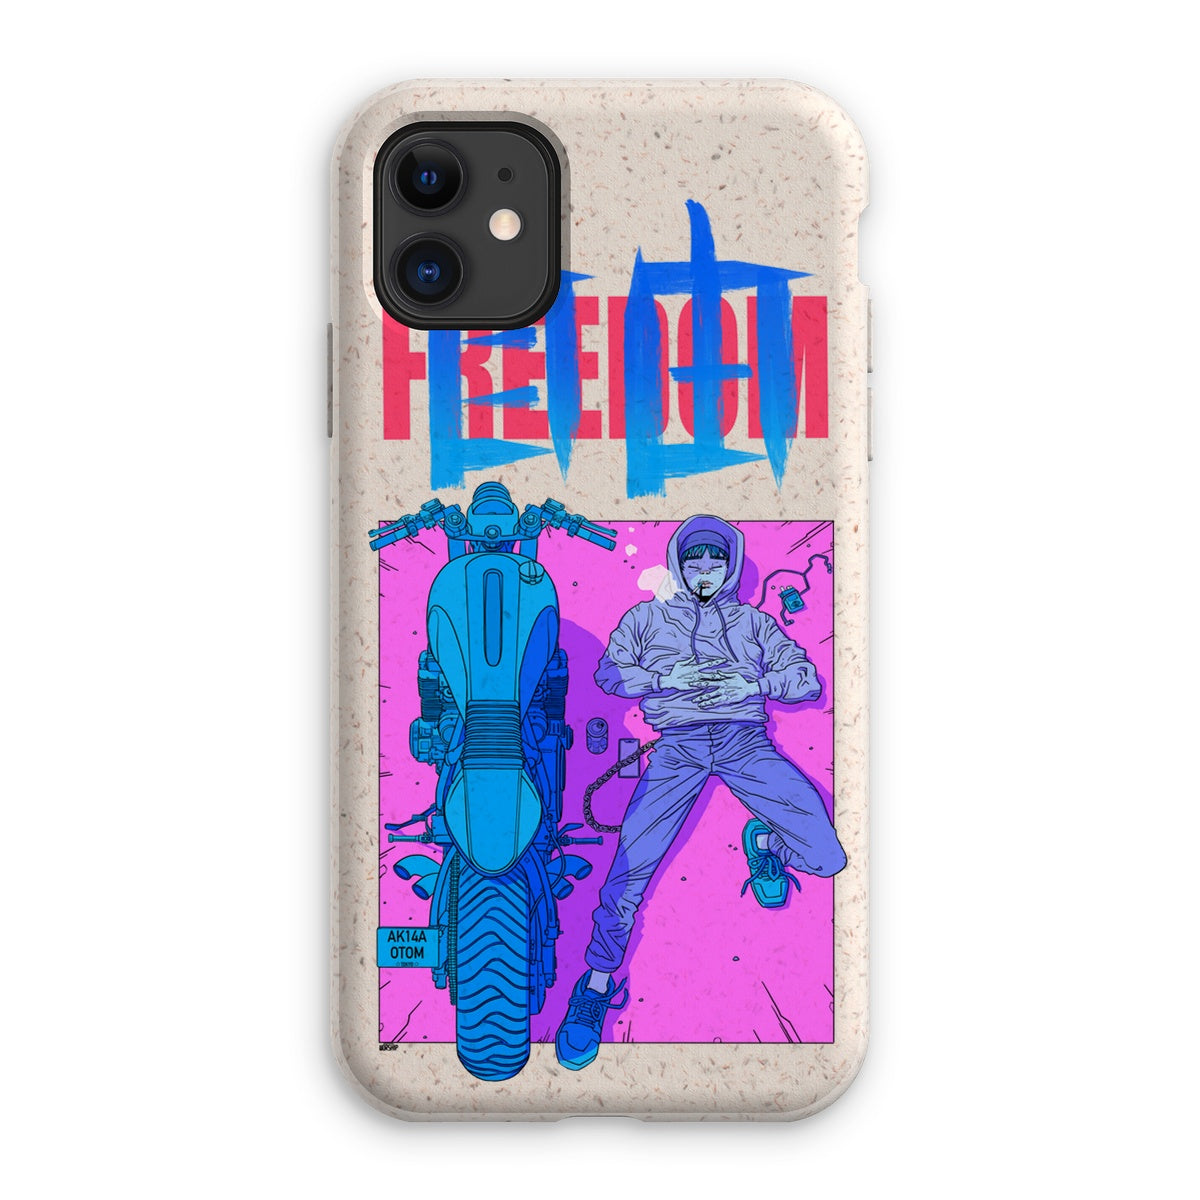 Unique and cool Gorillaz-style freedom phone case illustration